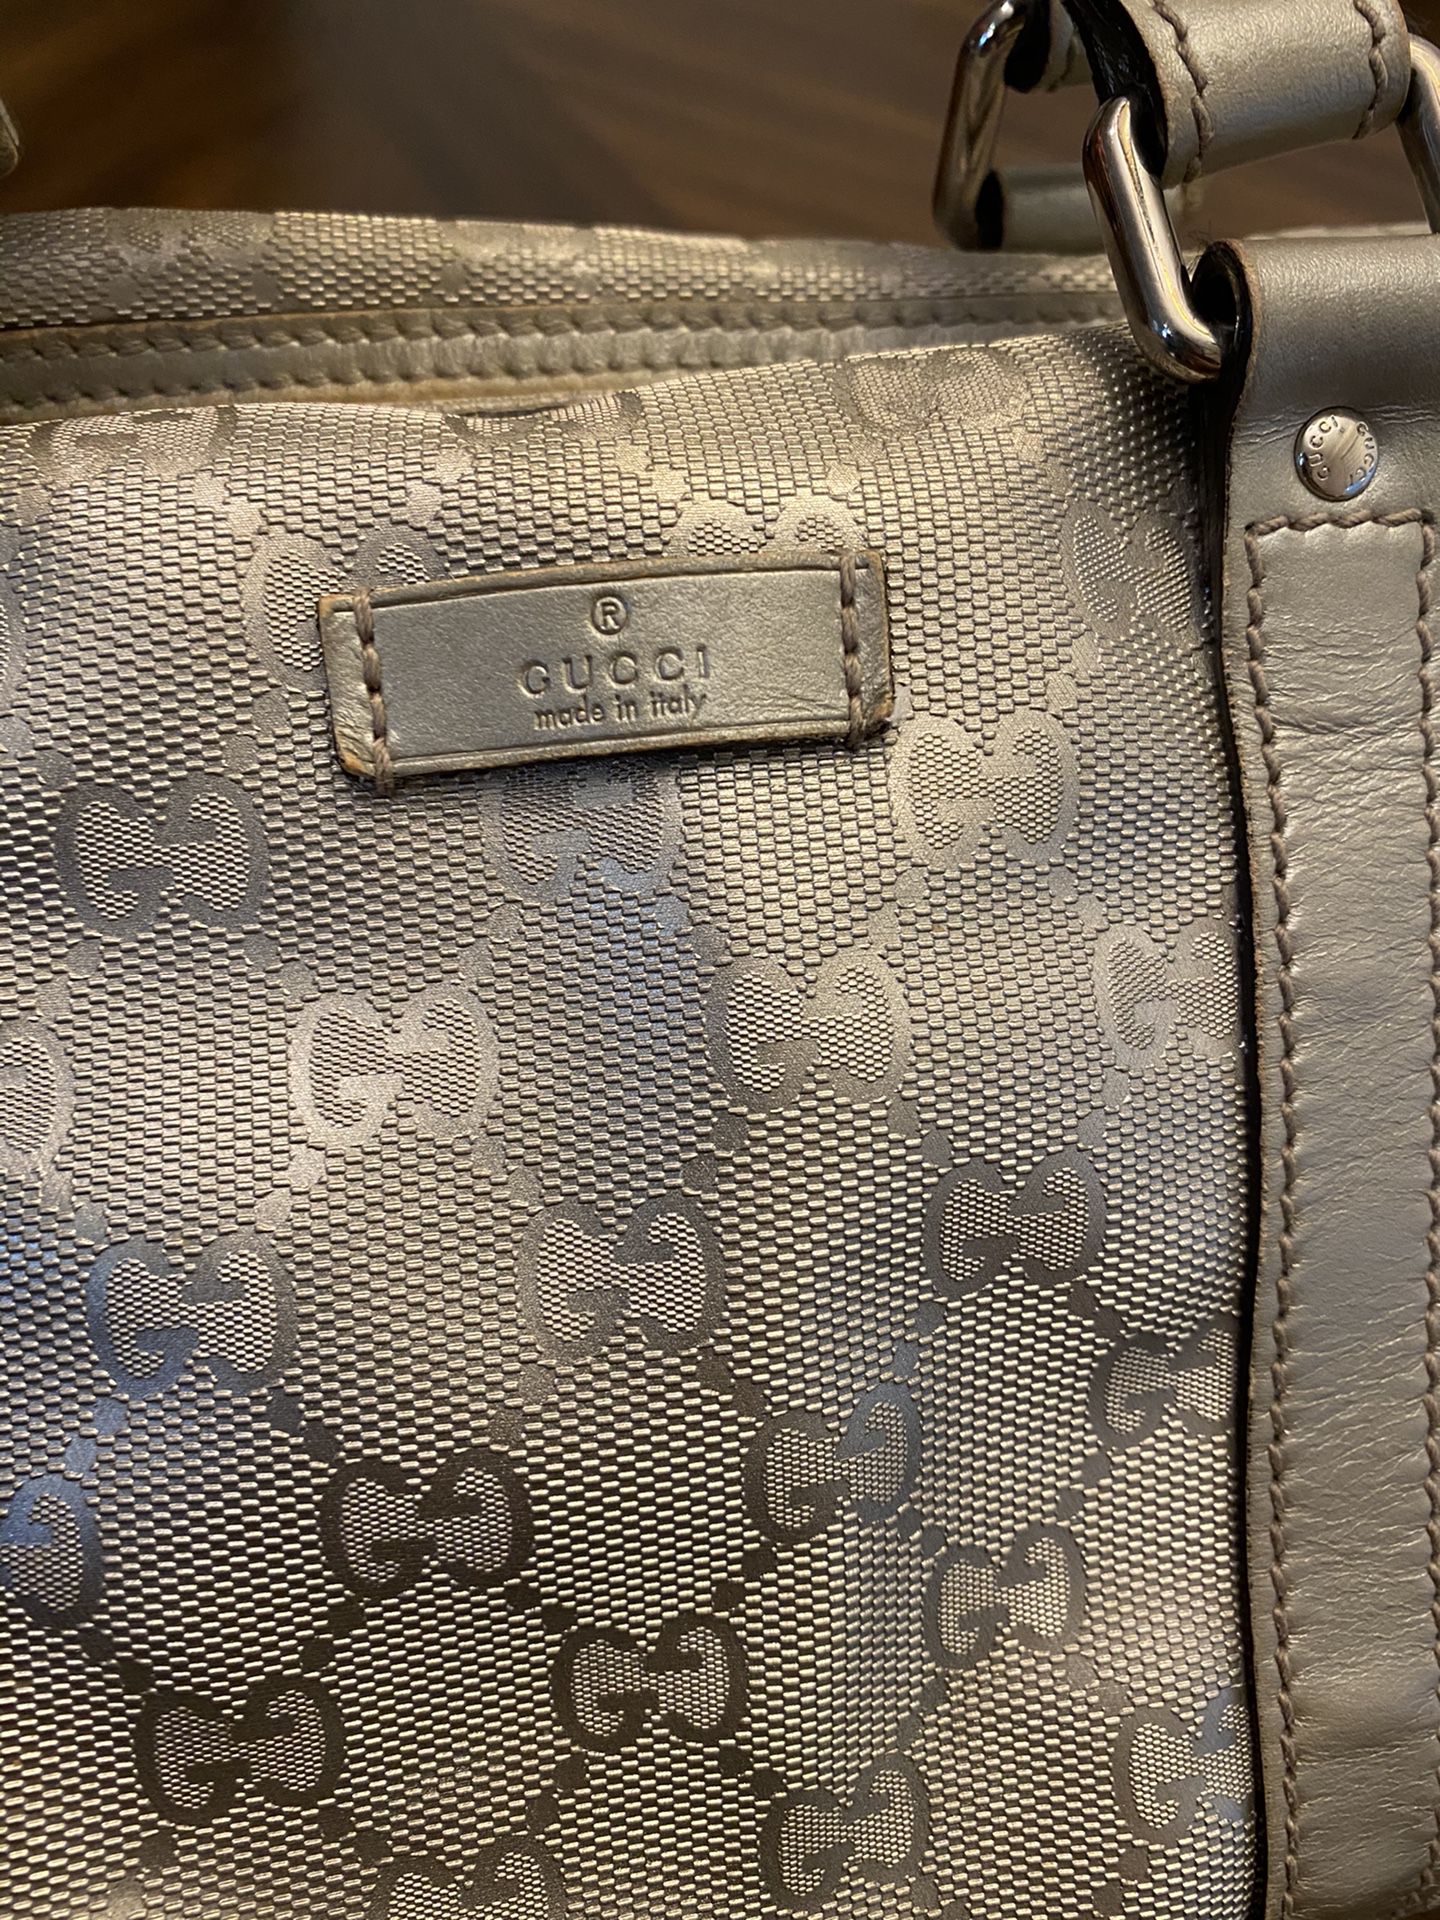 GUCCI GG Supreme Boston Bag Travel Bag 193603 for Sale in Garden City P, NY  - OfferUp